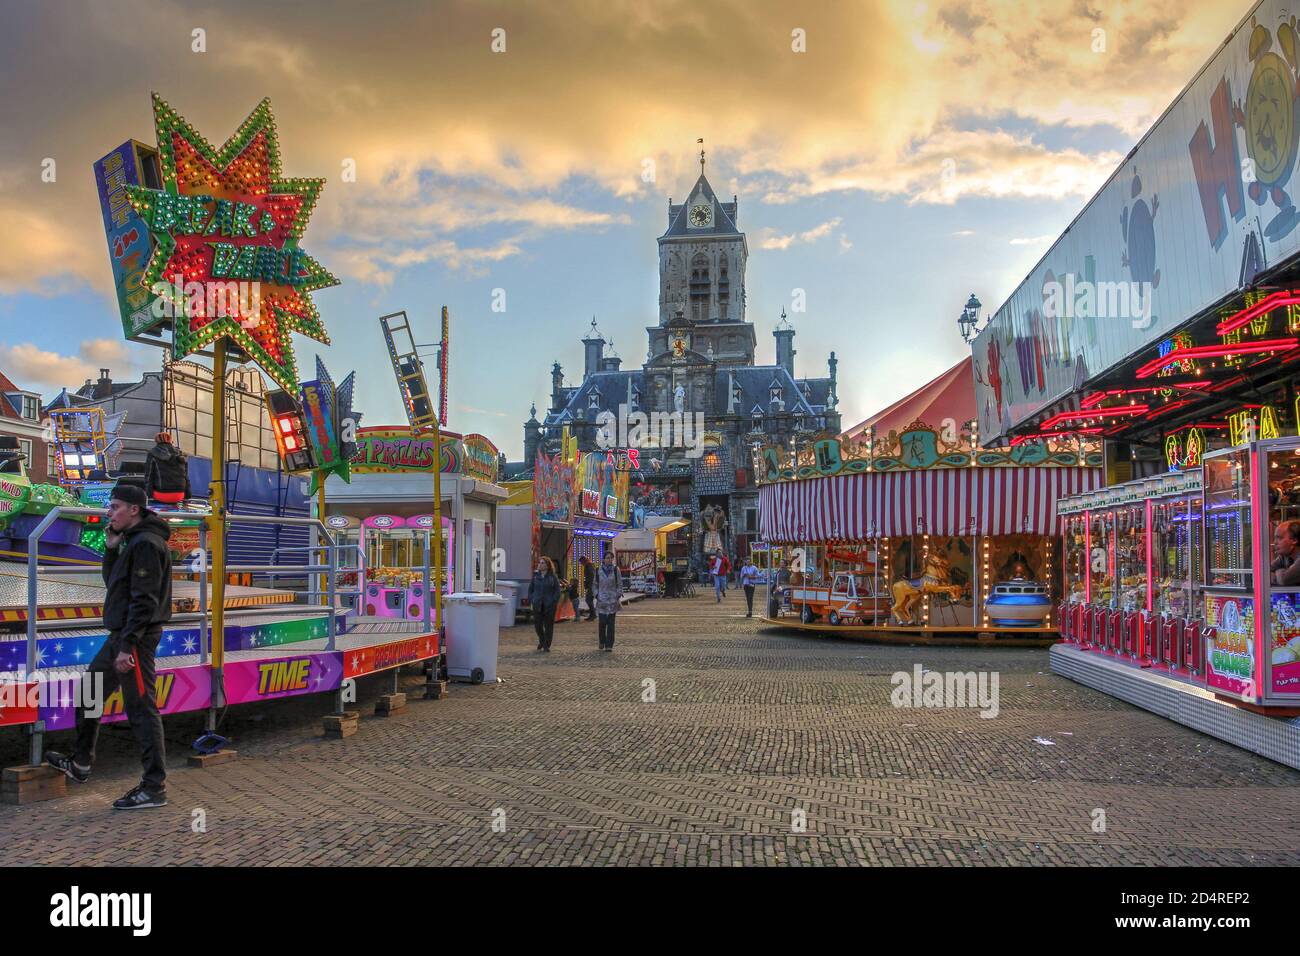 Funfair in Market Square (Markt) in Delft, The Netherlands with the City Hall in the background. Stock Photo